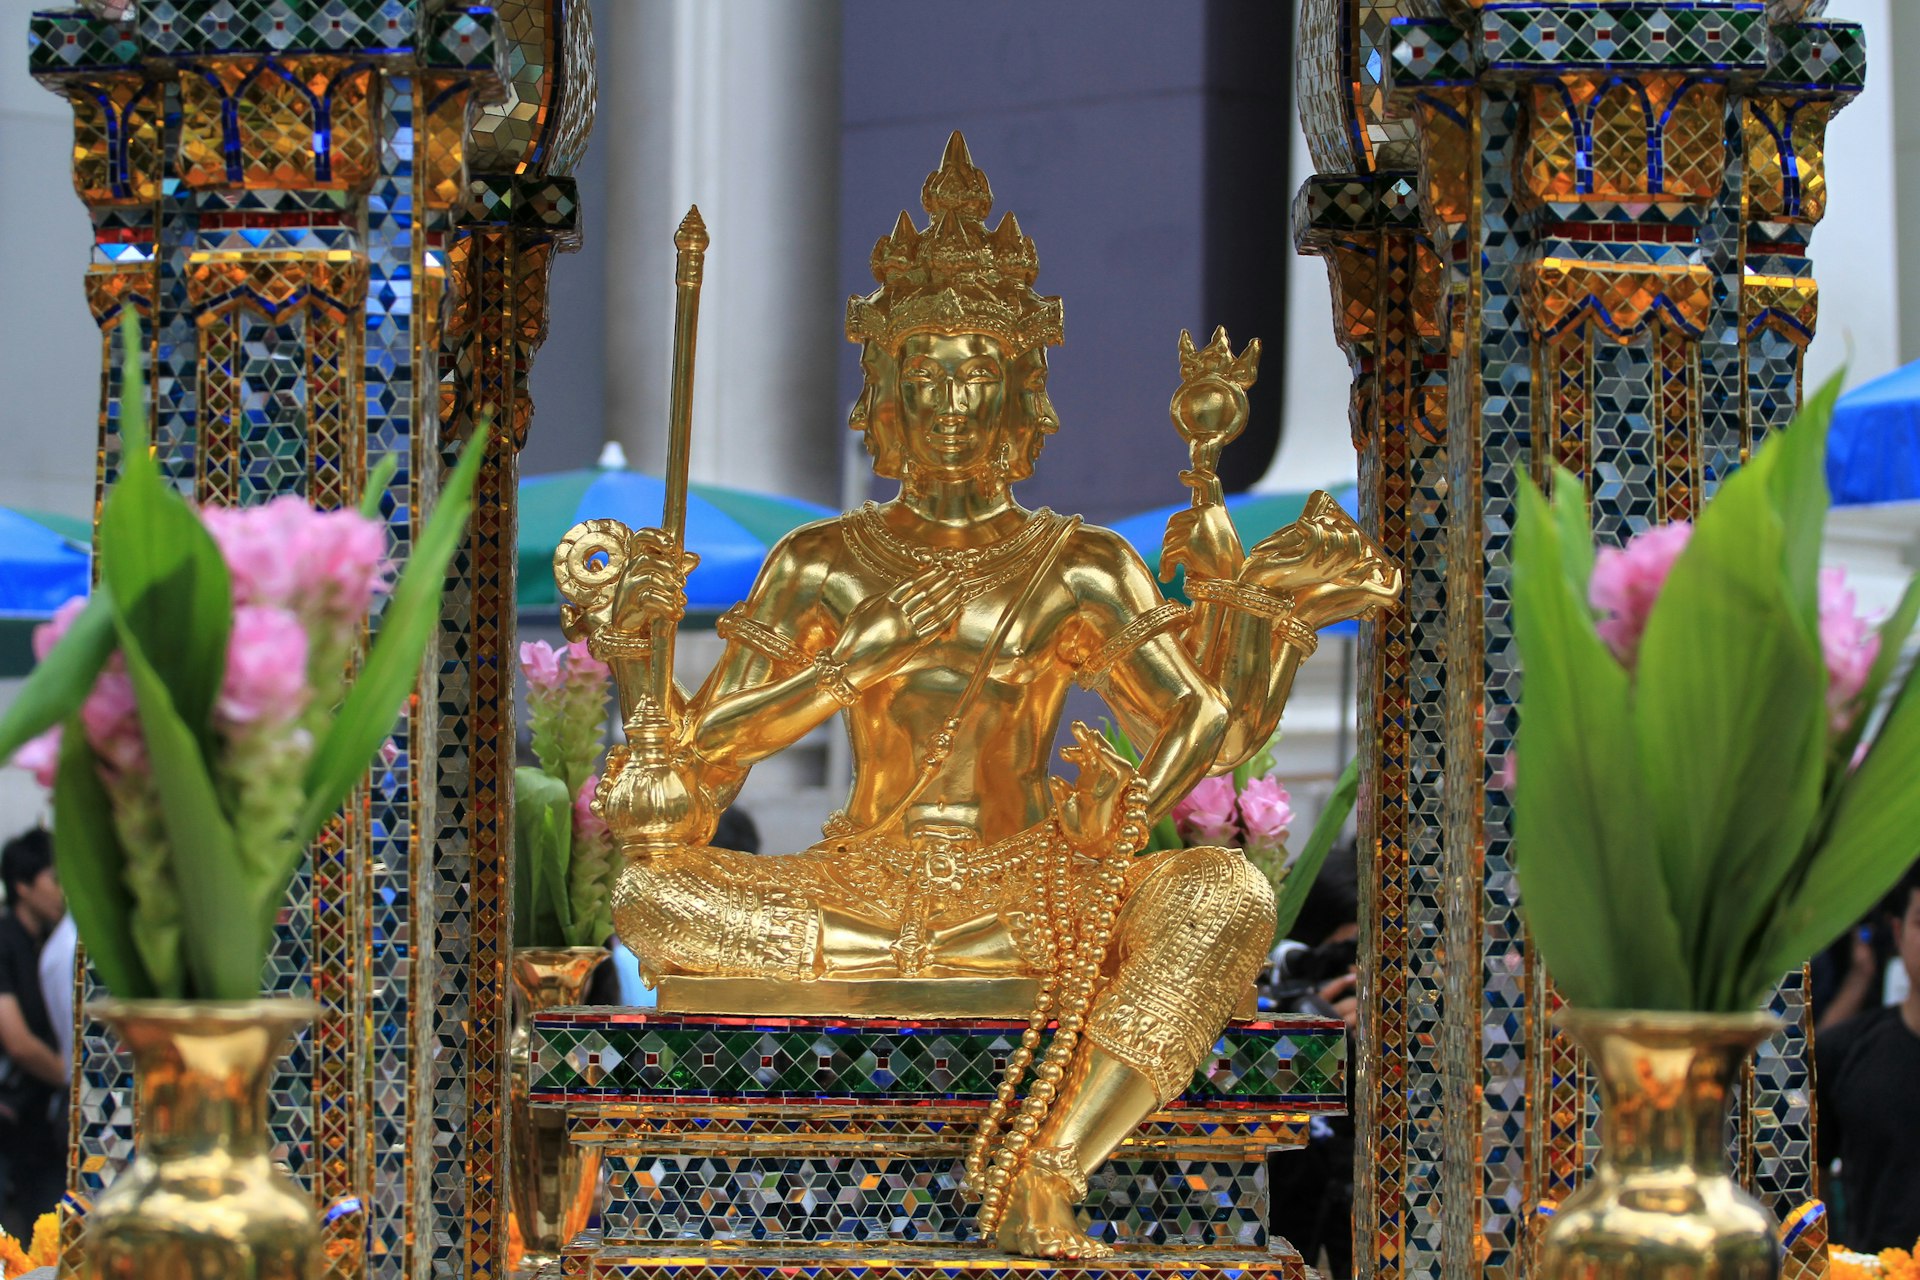 The restored golden statue of Lord Brahma (Phra Phrom) after the craftsmen from the Thai Fine Arts Department repaired the Erawan Shrine following a bombing.